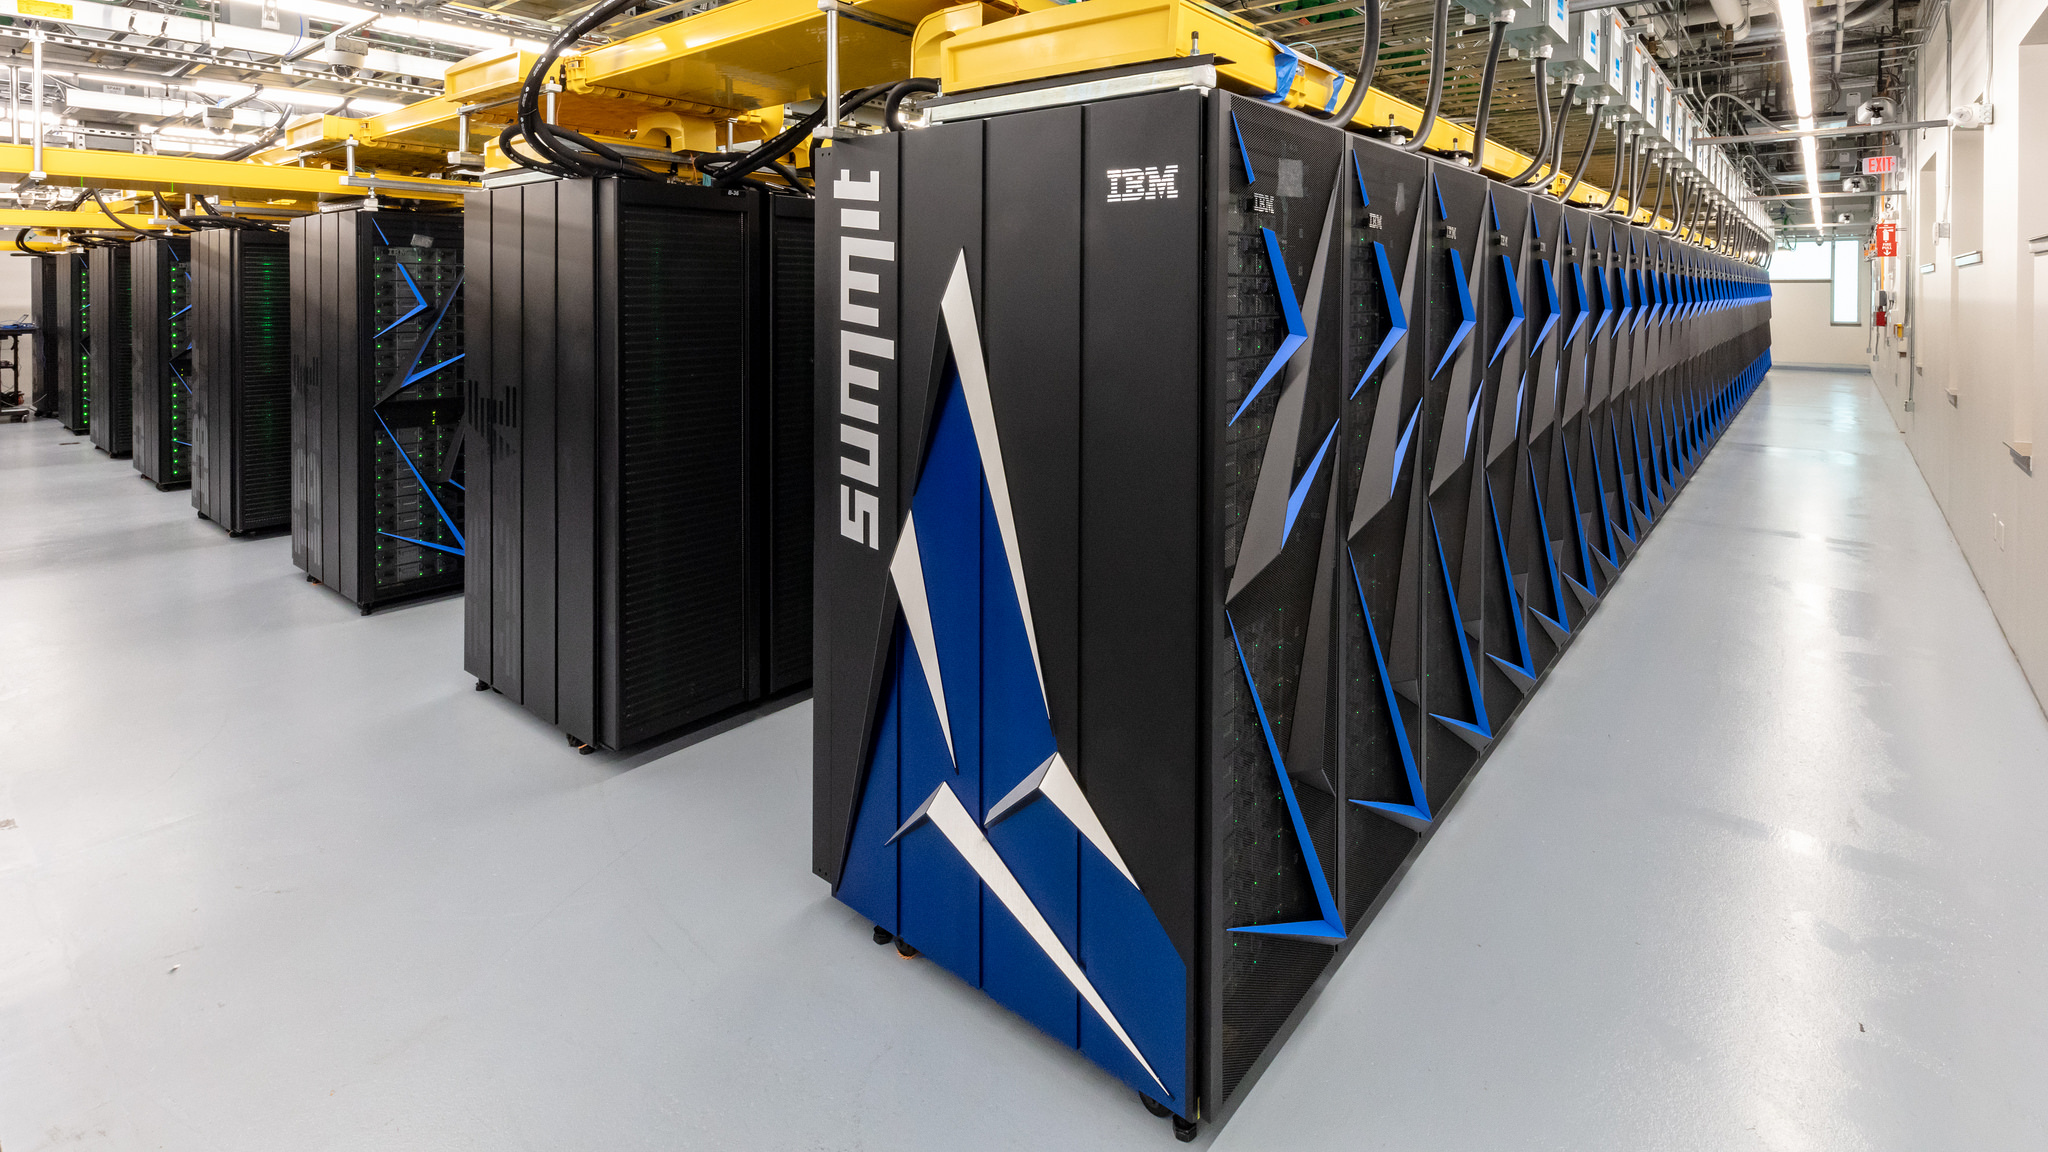 Meet the new fastest supercomputer in the world